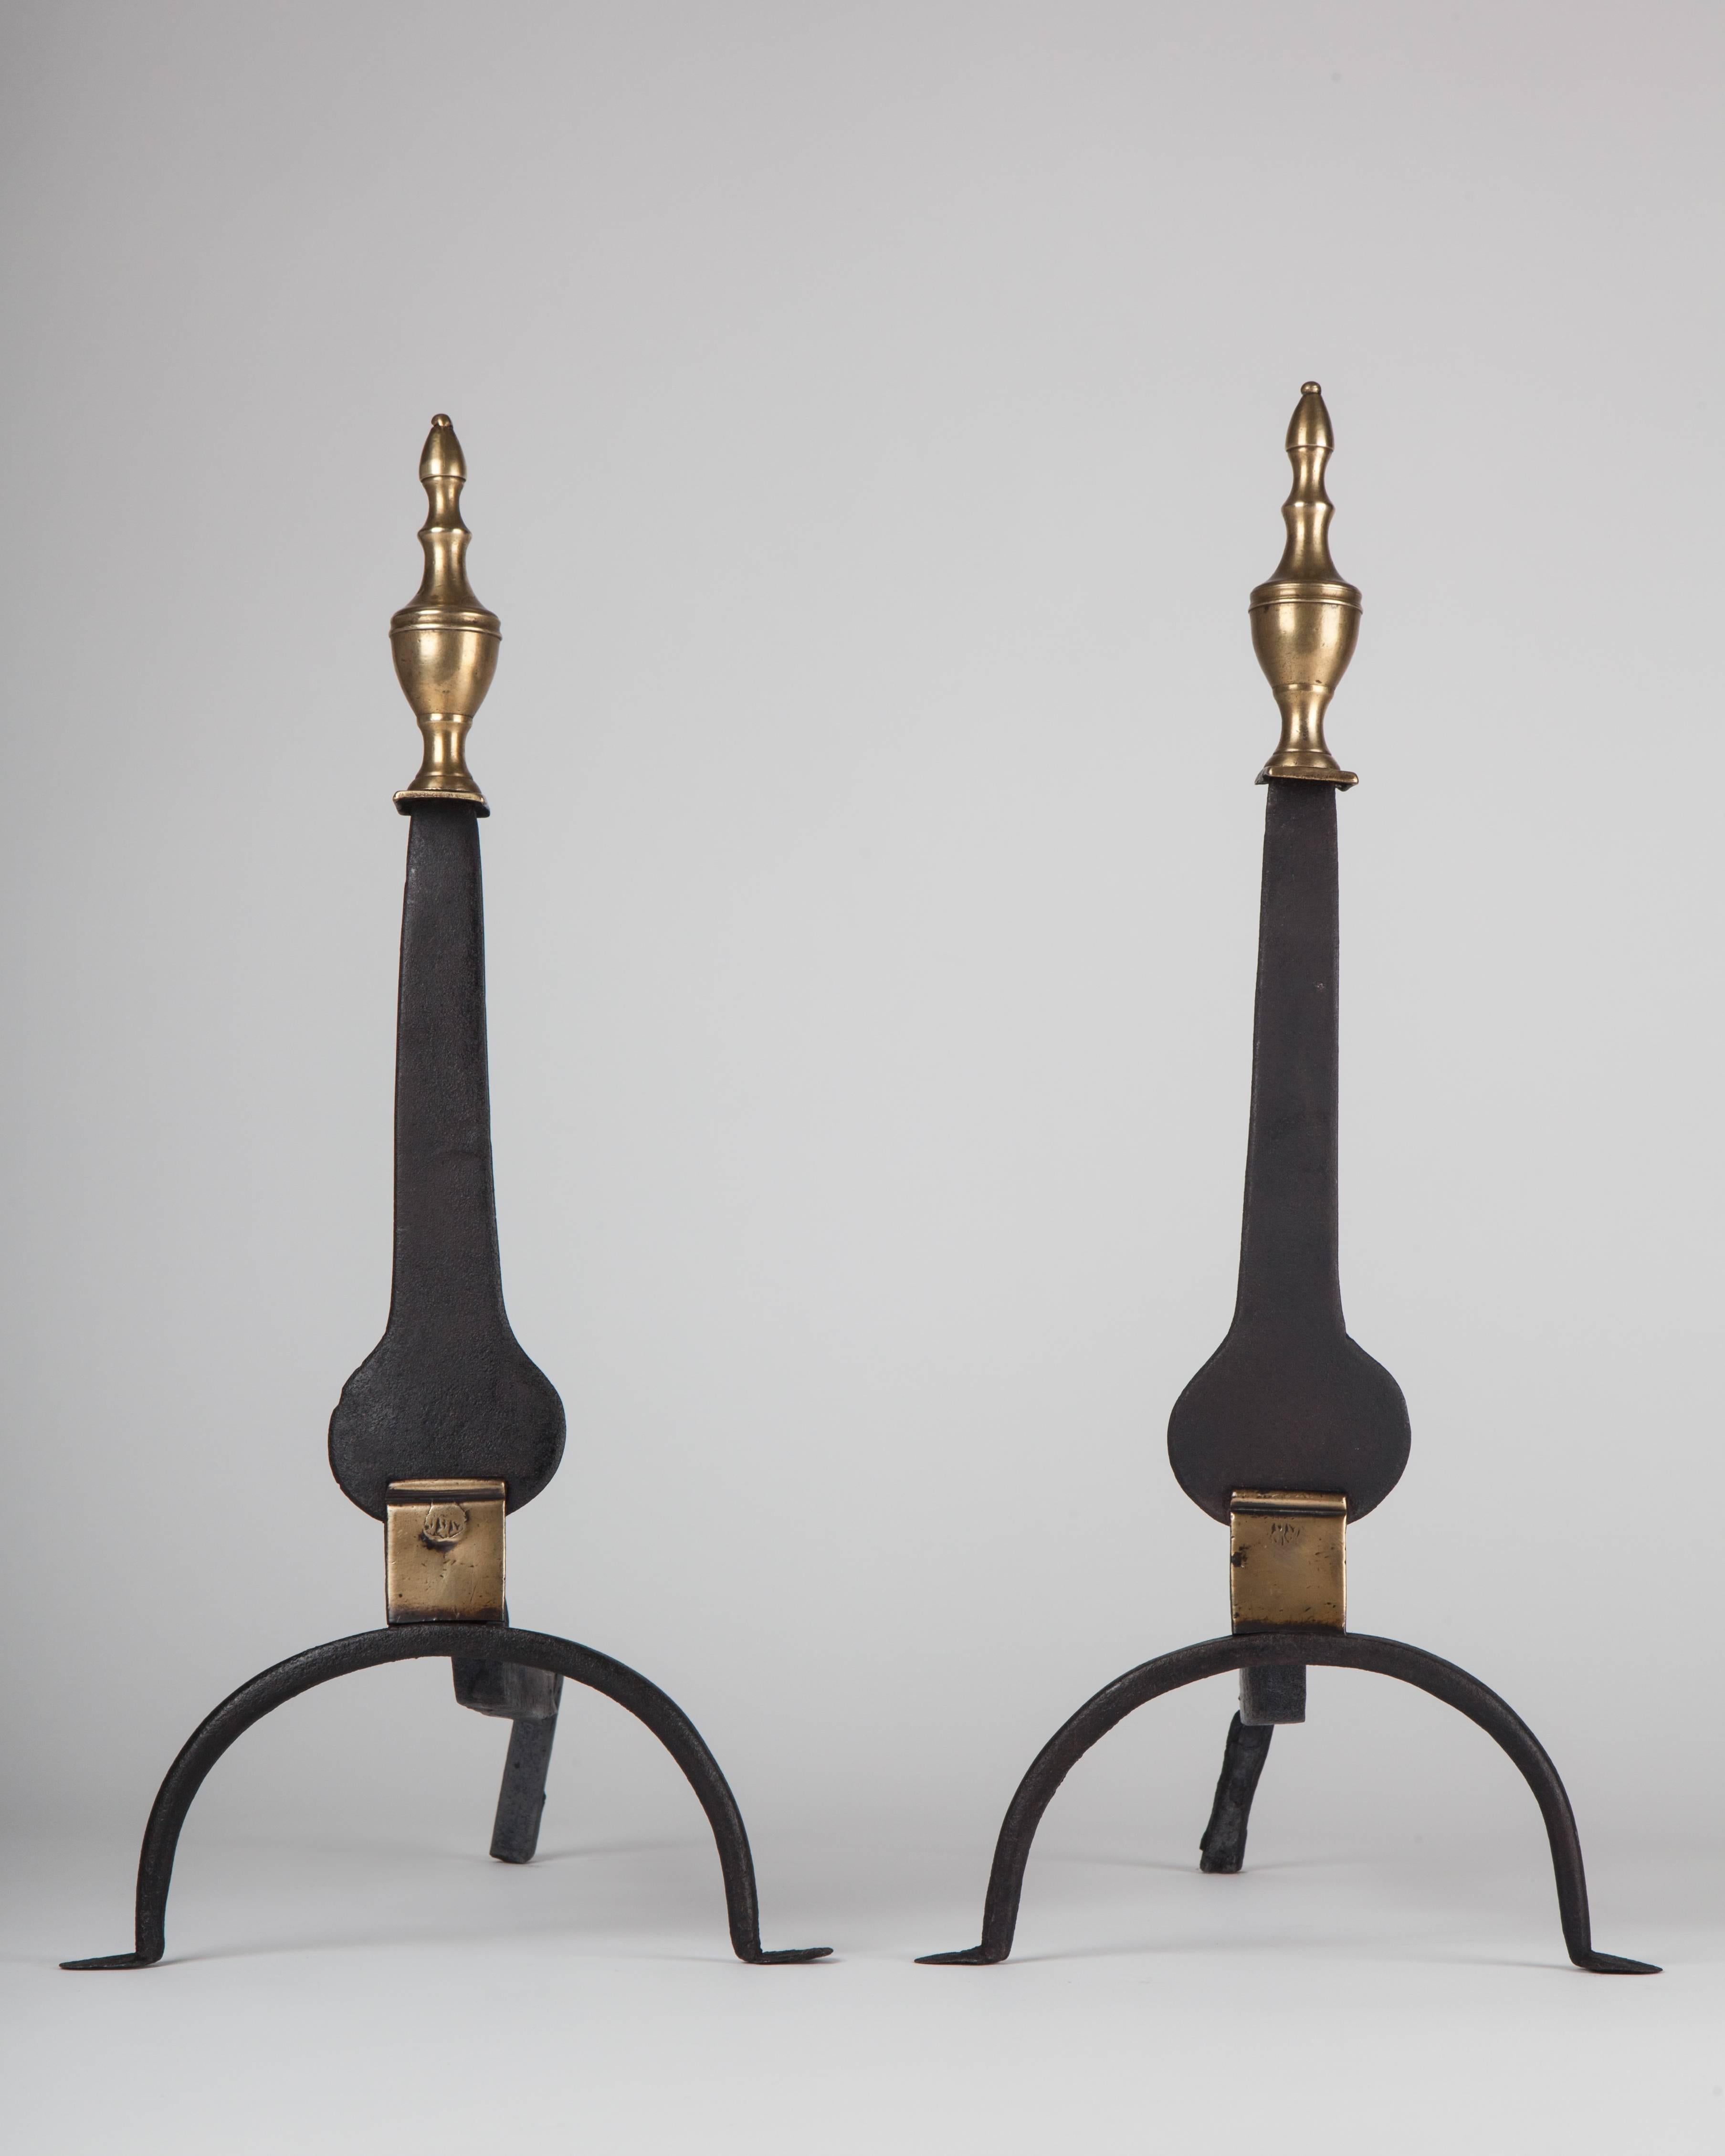 AFP0535
A pair of antique 18th century style wrought iron andirons with full round brass urn form finials and brass details atop blackened iron knife blade bodies.

Dimensions, per piece:
Overall: 20